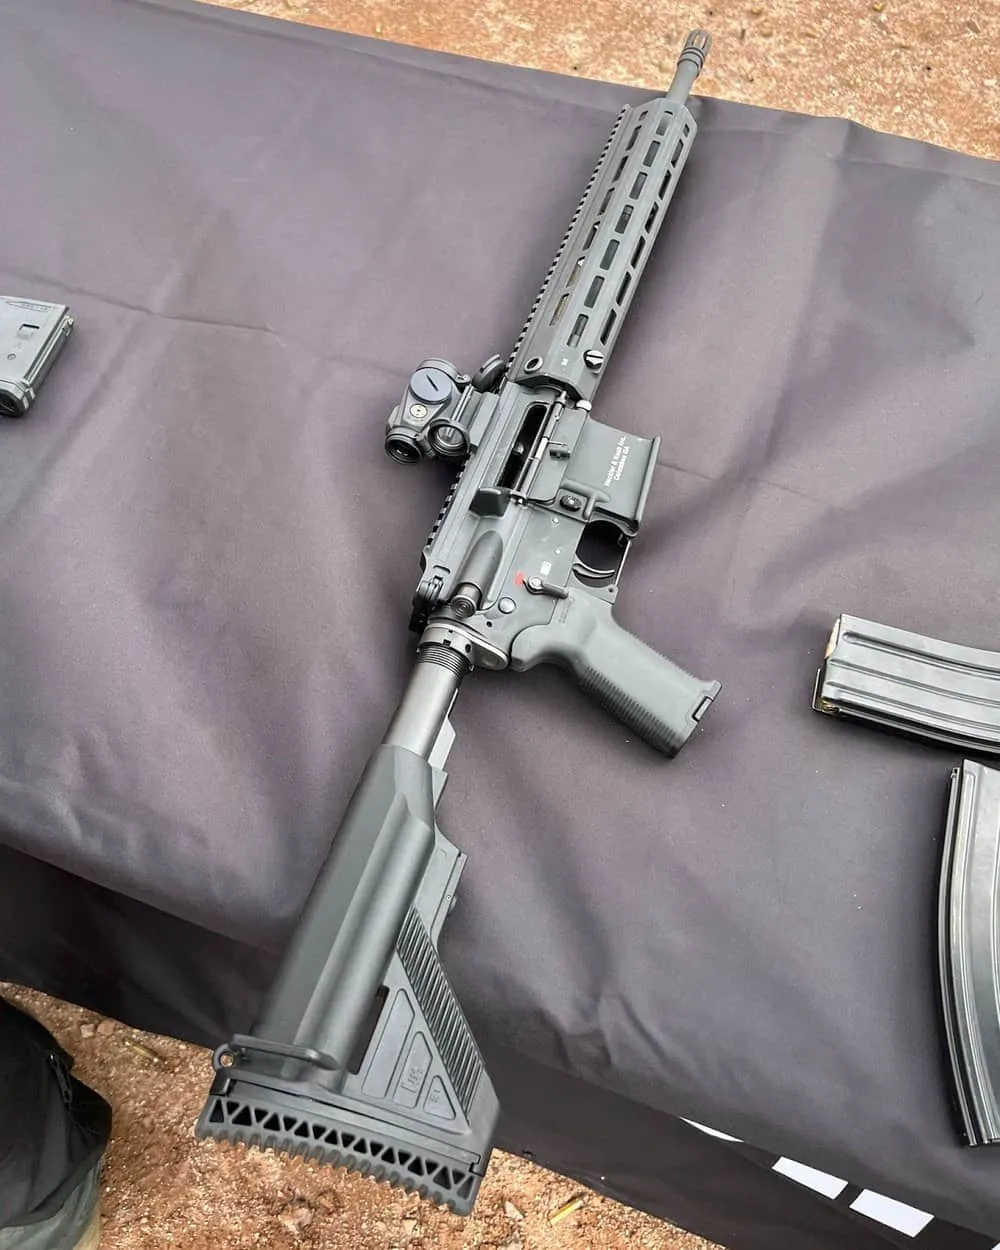 hk mr556 review at industry day at the range shot show